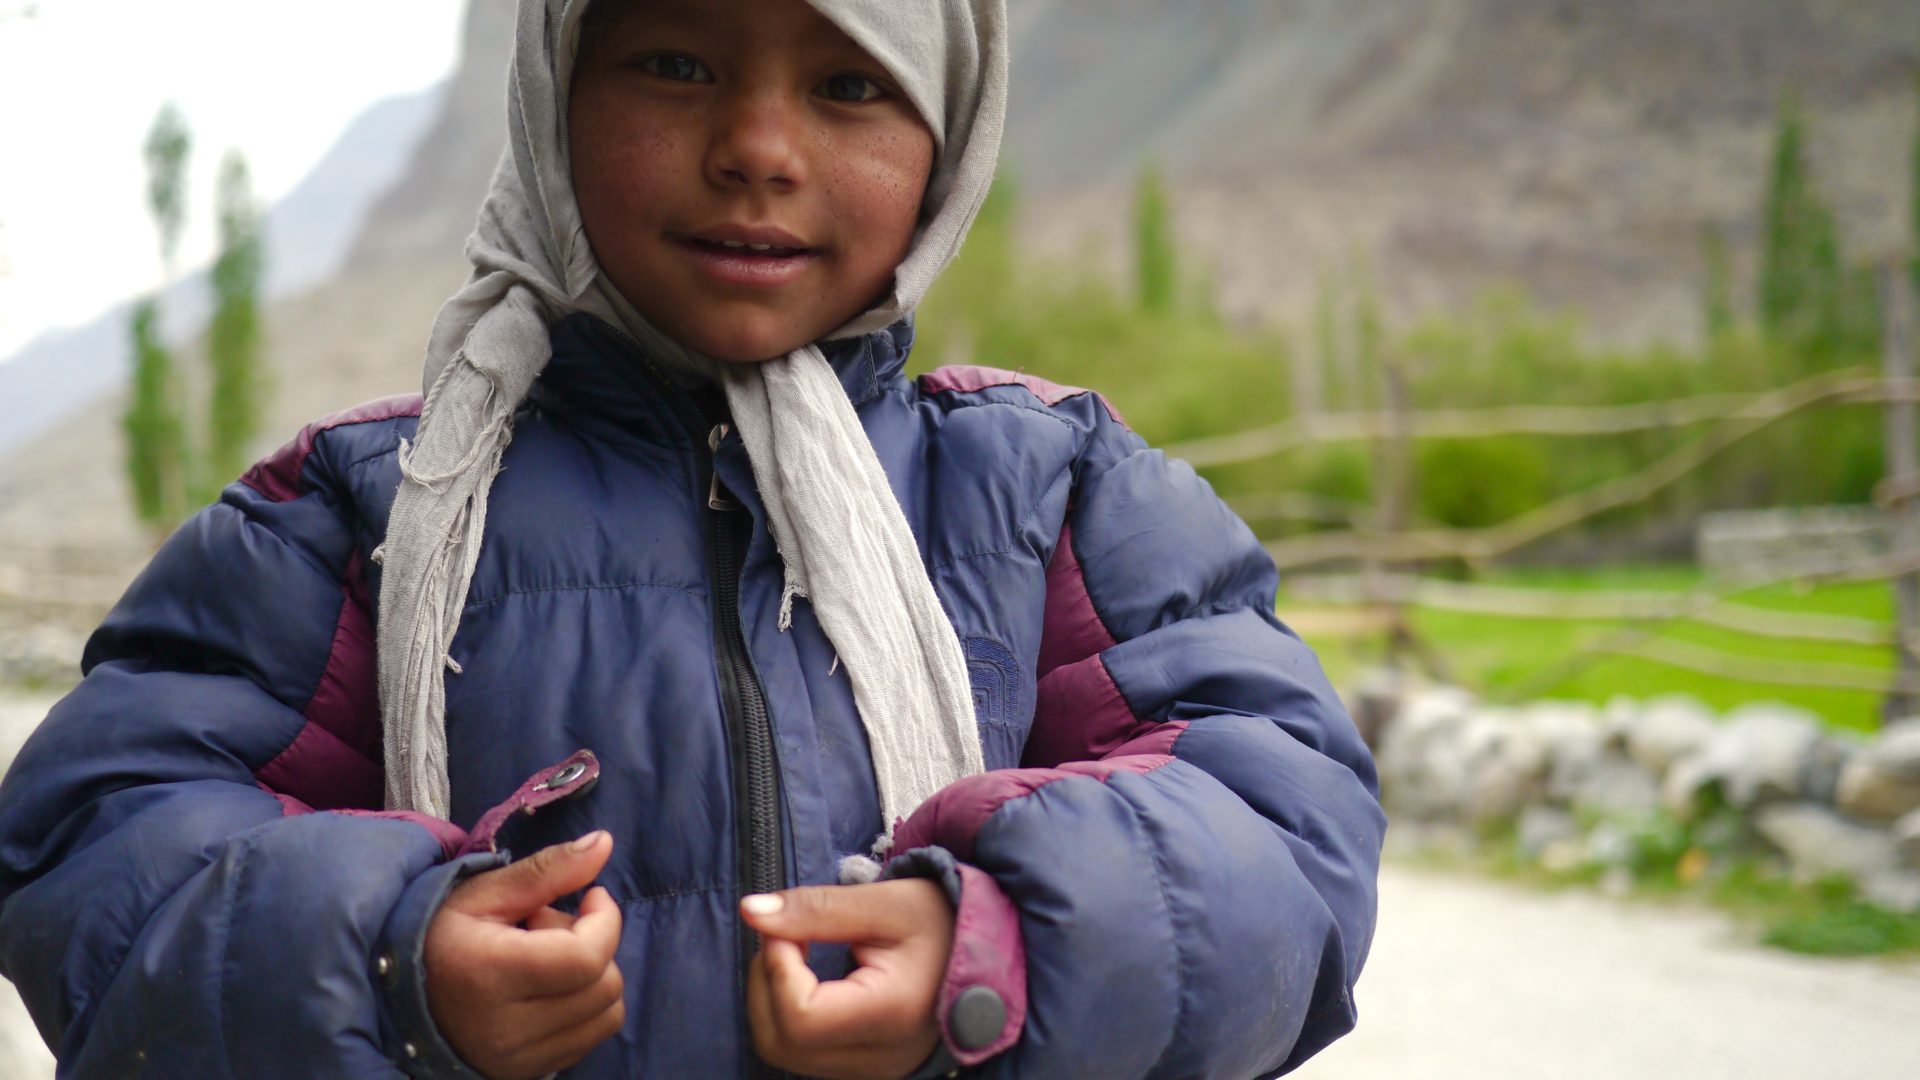 A child in the remote village of Turtuk, the last settlement before the Pakistan border we're allowed to visit.